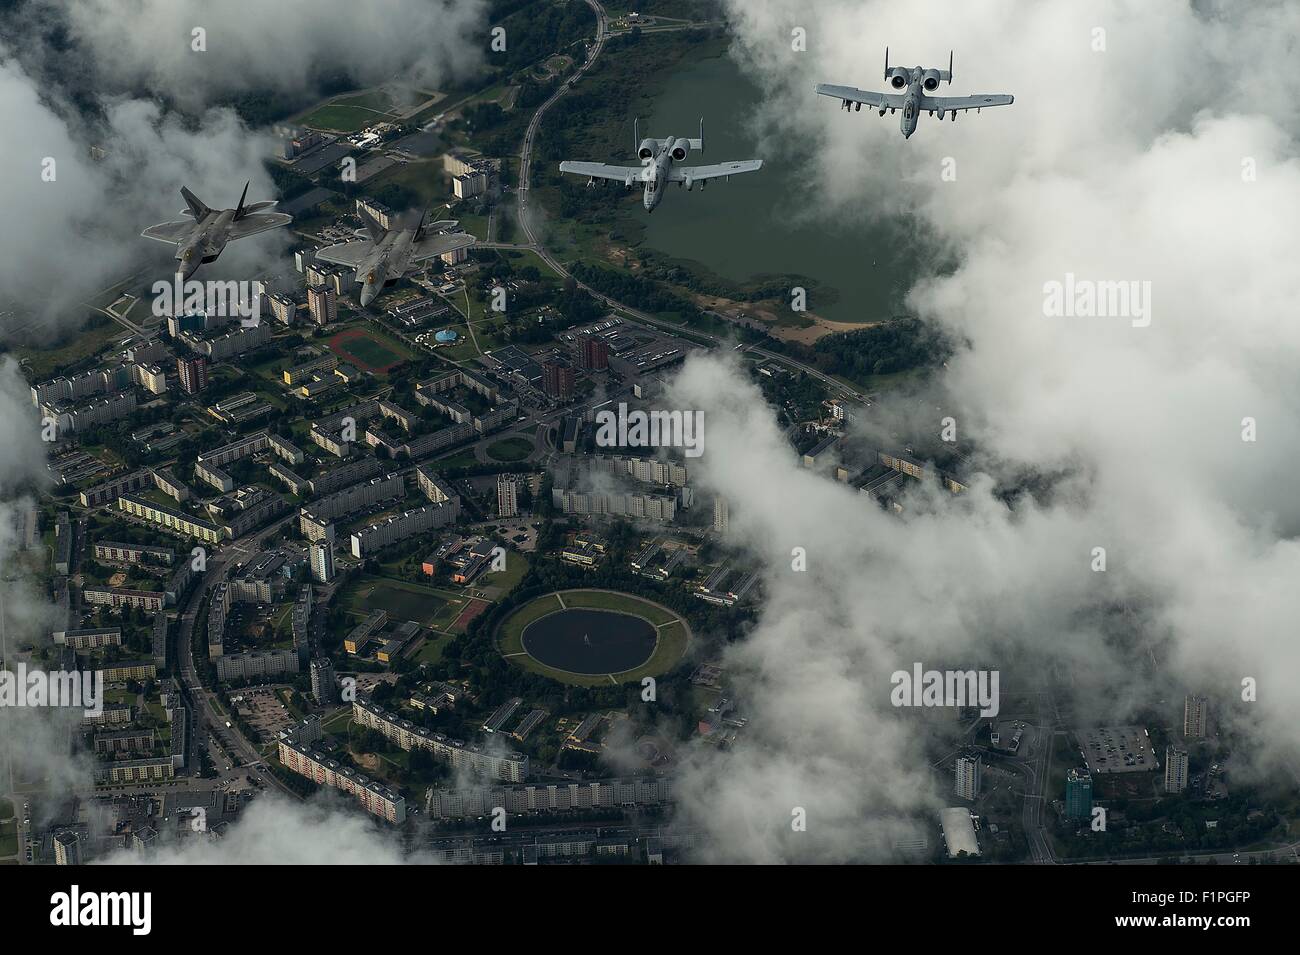 U.S. Air Force F-22 Raptor stealth fighter aircraft and A-10 Thunderbolt ground attack aircraft fly over the capital in formation during a forward deployment in support of NATO partners in Europe September 4, 2015 over Tallinn, Estonia. Stock Photo